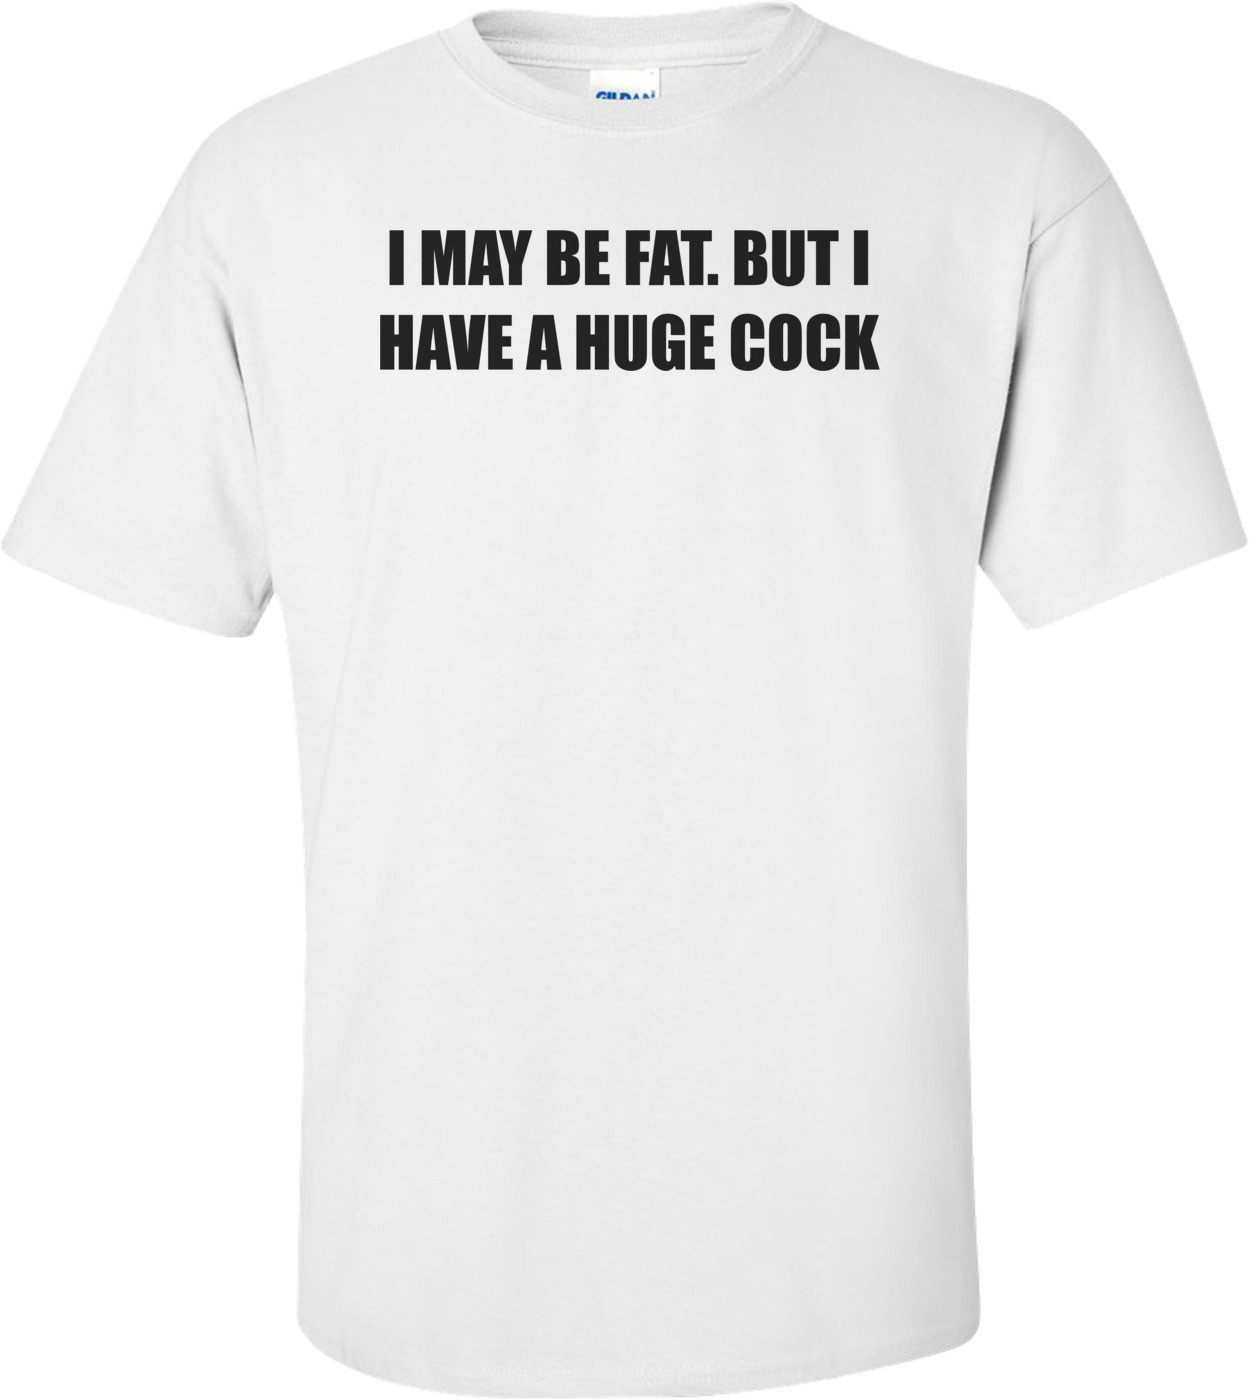 I MAY BE FAT. BUT I HAVE A HUGE COCK Shirt